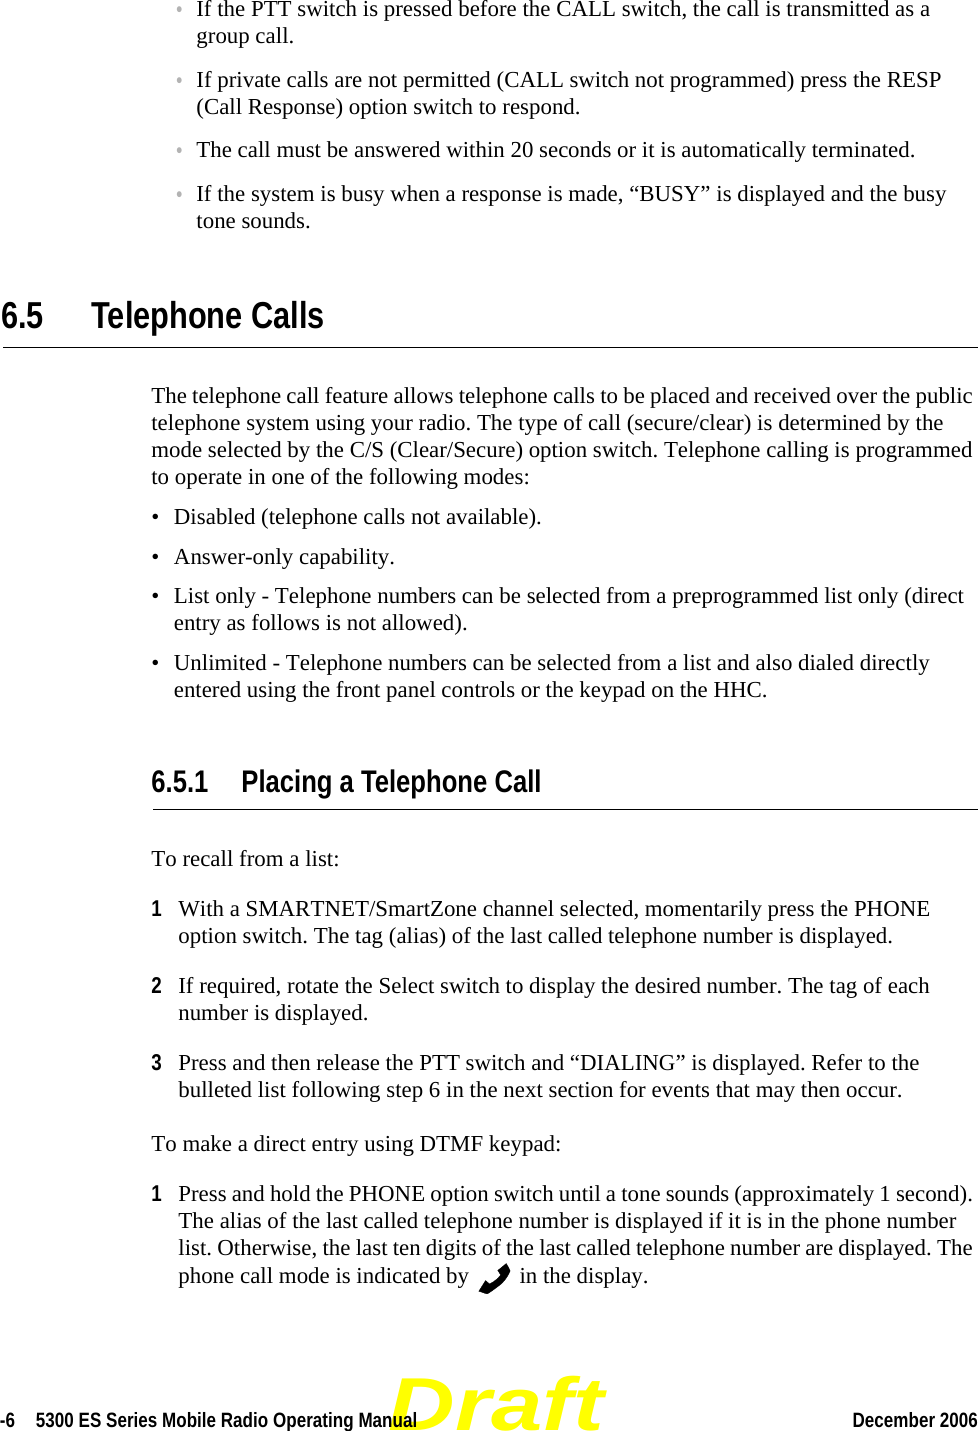 Draft-6  5300 ES Series Mobile Radio Operating Manual December 2006 •If the PTT switch is pressed before the CALL switch, the call is transmitted as a group call.•If private calls are not permitted (CALL switch not programmed) press the RESP (Call Response) option switch to respond.•The call must be answered within 20 seconds or it is automatically terminated.•If the system is busy when a response is made, “BUSY” is displayed and the busy tone sounds.6.5 Telephone CallsThe telephone call feature allows telephone calls to be placed and received over the public telephone system using your radio. The type of call (secure/clear) is determined by the mode selected by the C/S (Clear/Secure) option switch. Telephone calling is programmed to operate in one of the following modes:• Disabled (telephone calls not available).• Answer-only capability.• List only - Telephone numbers can be selected from a preprogrammed list only (direct entry as follows is not allowed).• Unlimited - Telephone numbers can be selected from a list and also dialed directly entered using the front panel controls or the keypad on the HHC.6.5.1 Placing a Telephone CallTo recall from a list:1With a SMARTNET/SmartZone channel selected, momentarily press the PHONE option switch. The tag (alias) of the last called telephone number is displayed.2If required, rotate the Select switch to display the desired number. The tag of each number is displayed.3Press and then release the PTT switch and “DIALING” is displayed. Refer to the bulleted list following step 6 in the next section for events that may then occur.To make a direct entry using DTMF keypad:1Press and hold the PHONE option switch until a tone sounds (approximately 1 second). The alias of the last called telephone number is displayed if it is in the phone number list. Otherwise, the last ten digits of the last called telephone number are displayed. The phone call mode is indicated by   in the display.